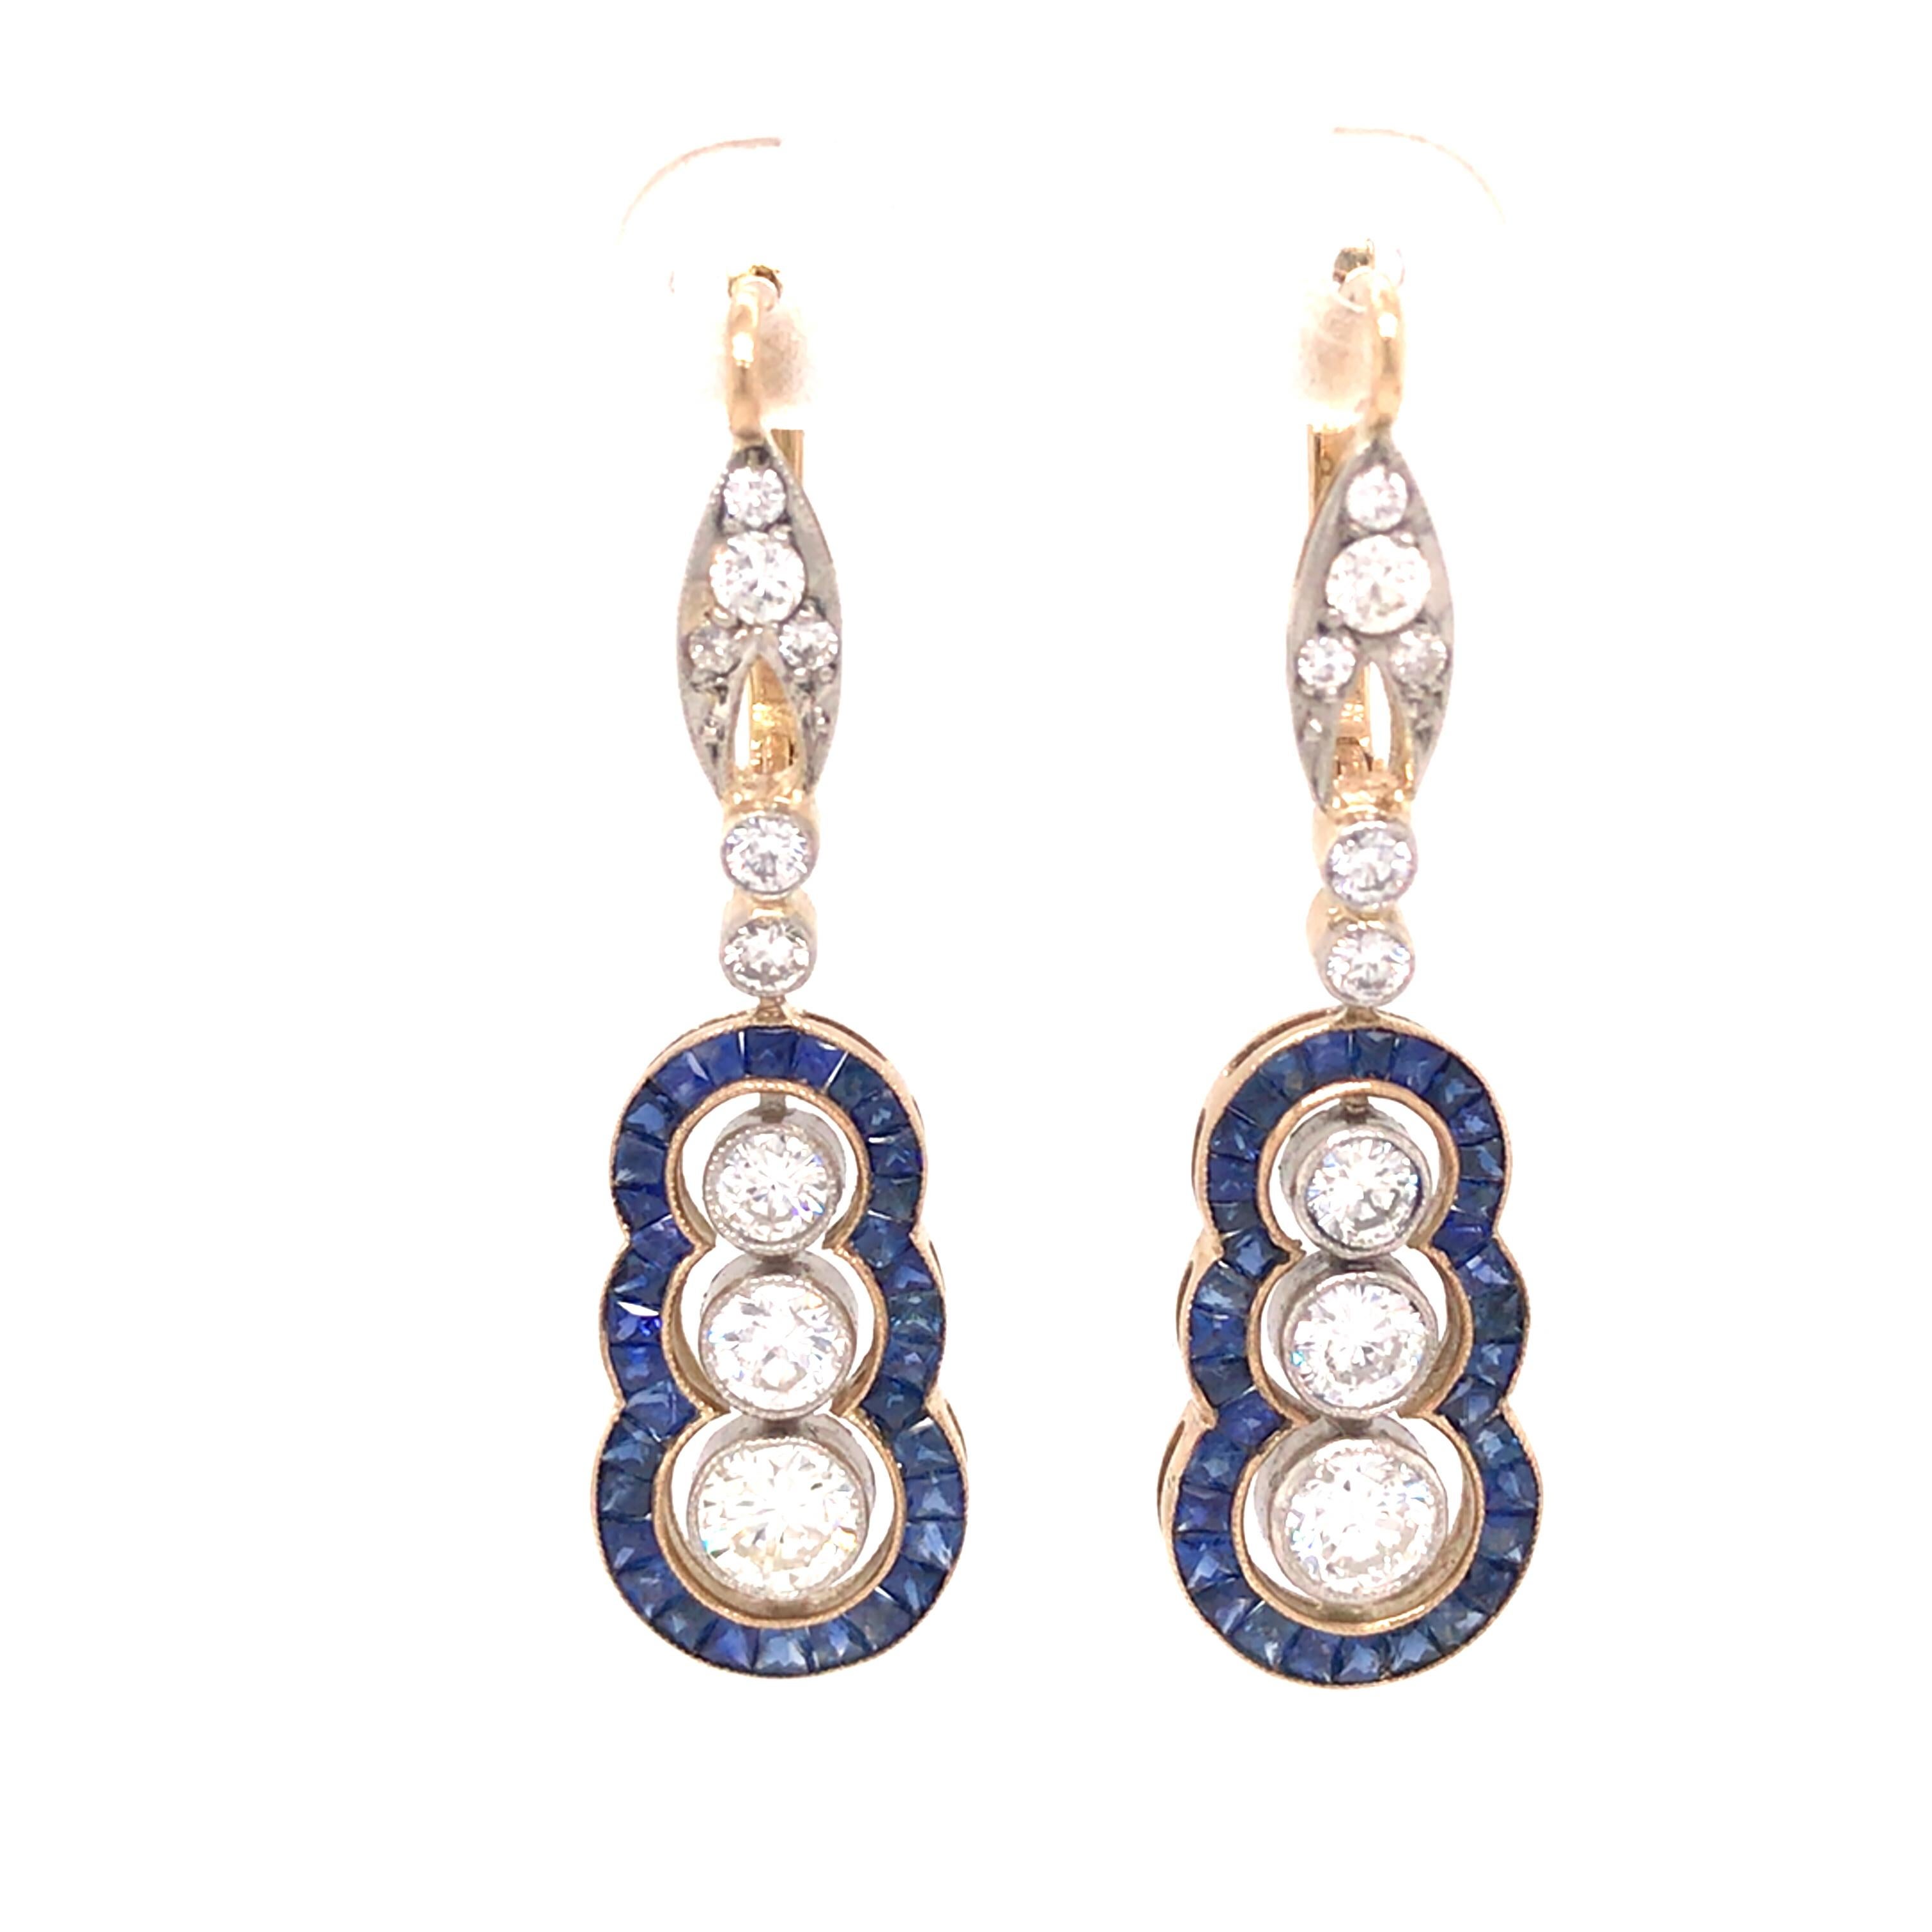 Vintage Art Deco Sapphire Diamond Hanging Earring in 18K Yellow Gold and Platinum.  Round Brilliant Cut Diamonds weighing 3.0 carat total weight, G-I in color and VS-SI in clarity are expertly set with Sapphires weighing 2.0 carat total weight.  The